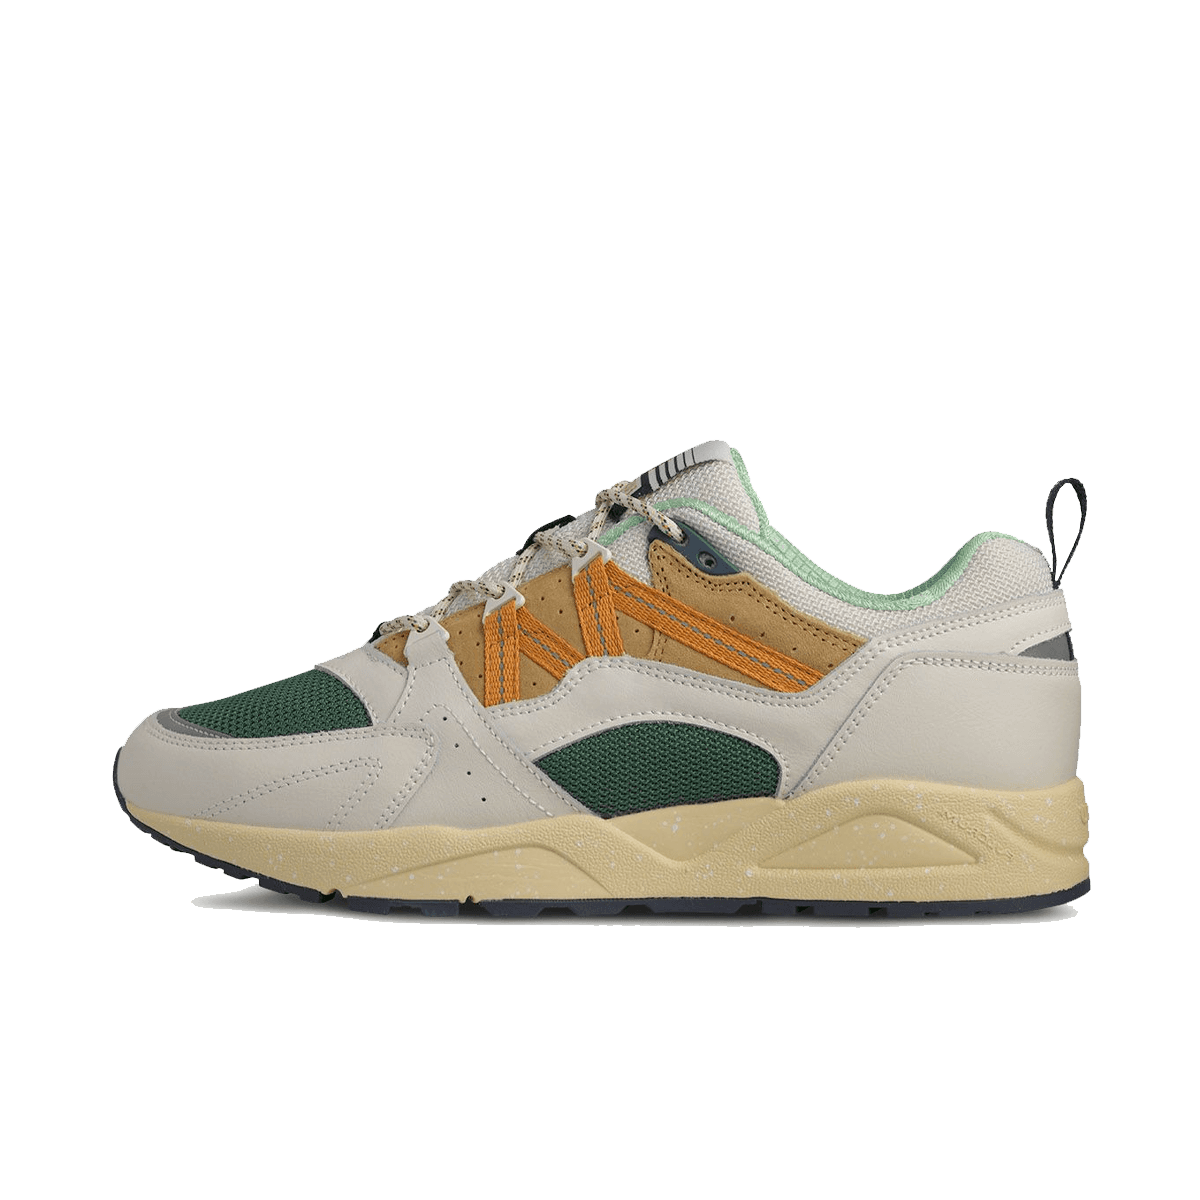 Karhu Fusion 2.0 'Lily White' - The Forest Rules